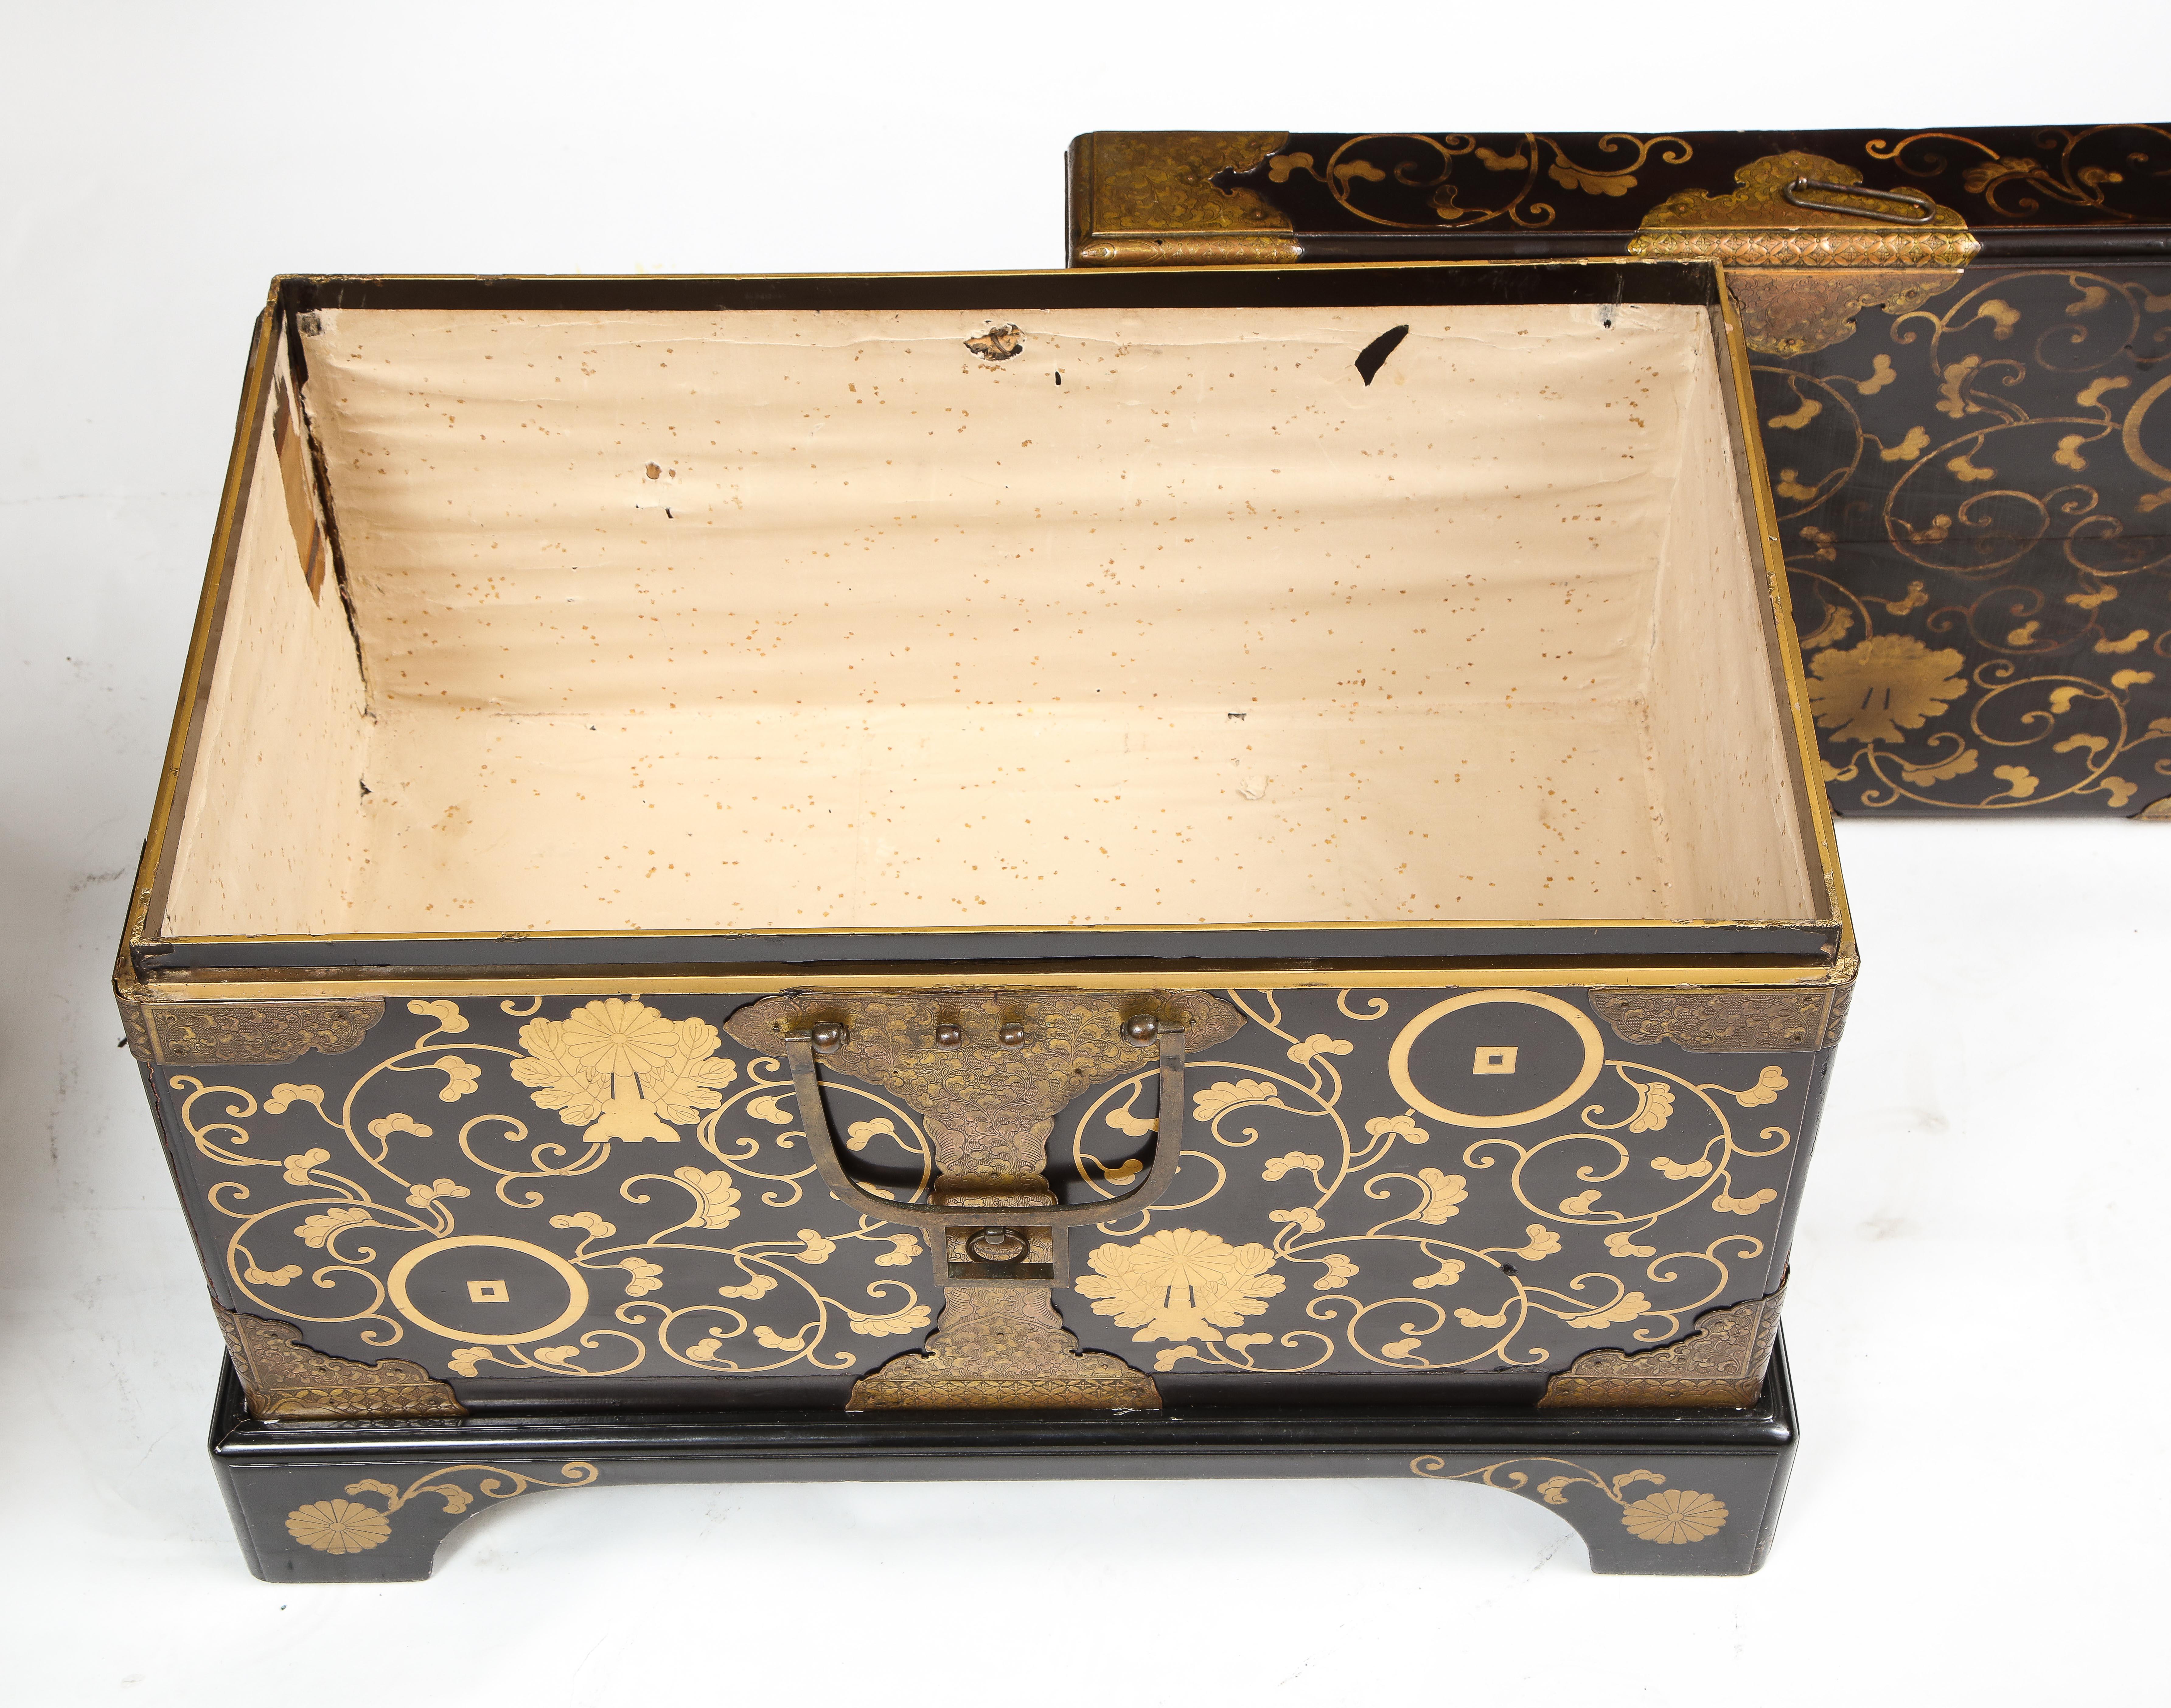  Pair of 19th Century Japanese Meiji Period Dore Bronze Mounted Lacquered Chests For Sale 10